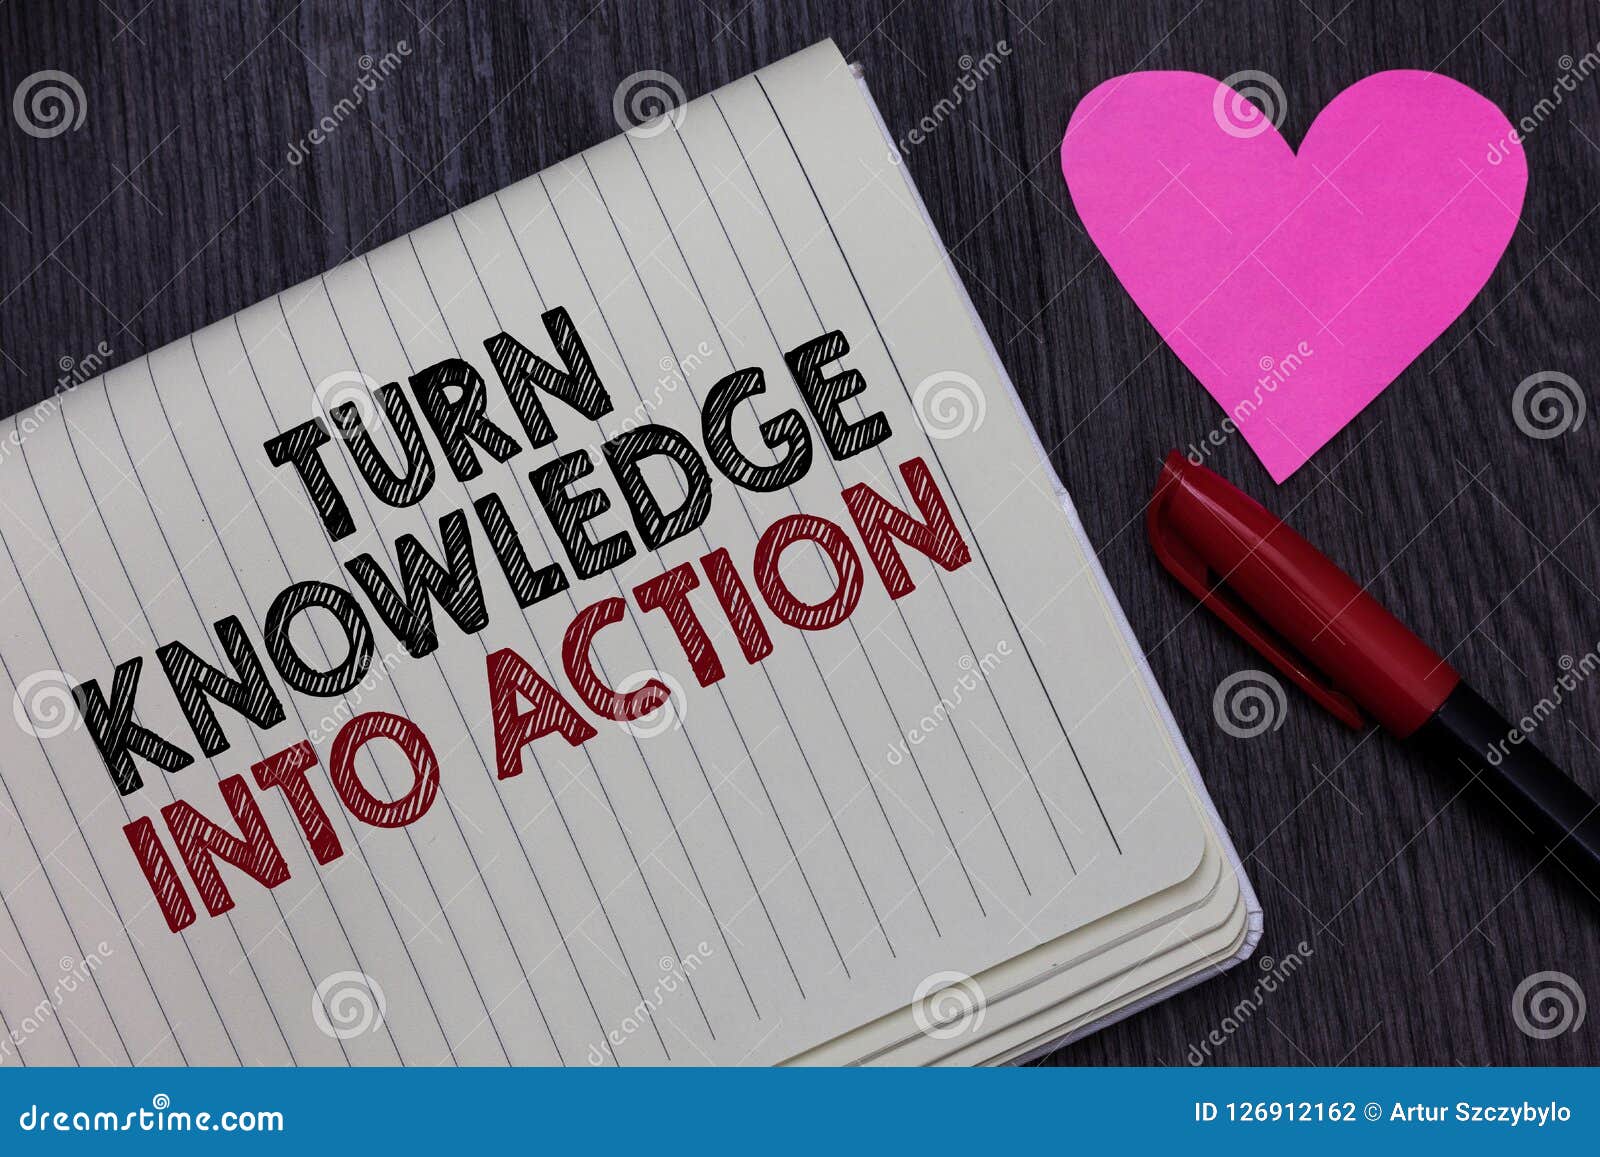 Writing Note Showing Turn Knowledge into Action. Business Photo Showcasing Apply What You Have Learned Leadership Strategies Stock Photo - Image of 126912162